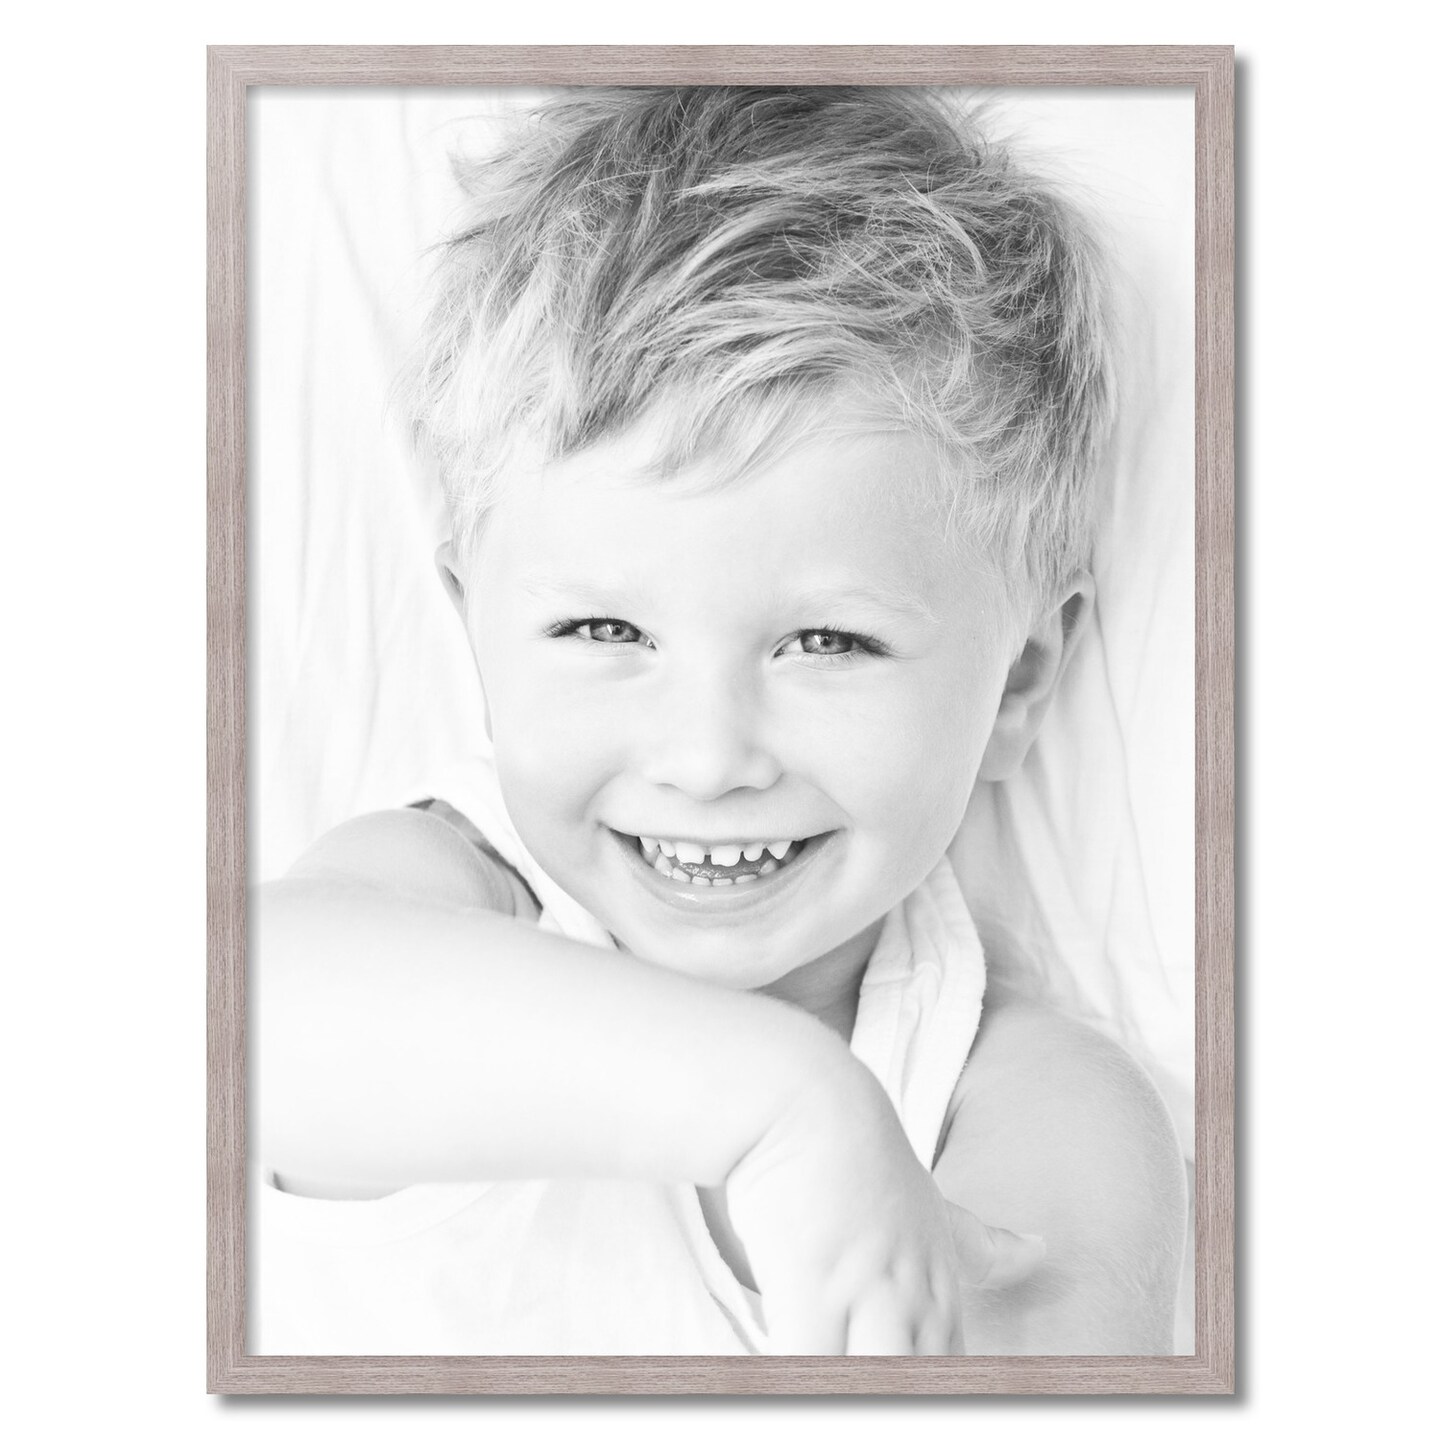 30x40 Frame Black with White Mat - Black 32x42 Frame Wood Made to Display  Print or Poster Sized 30 x 40 Inches with White Picture Mat